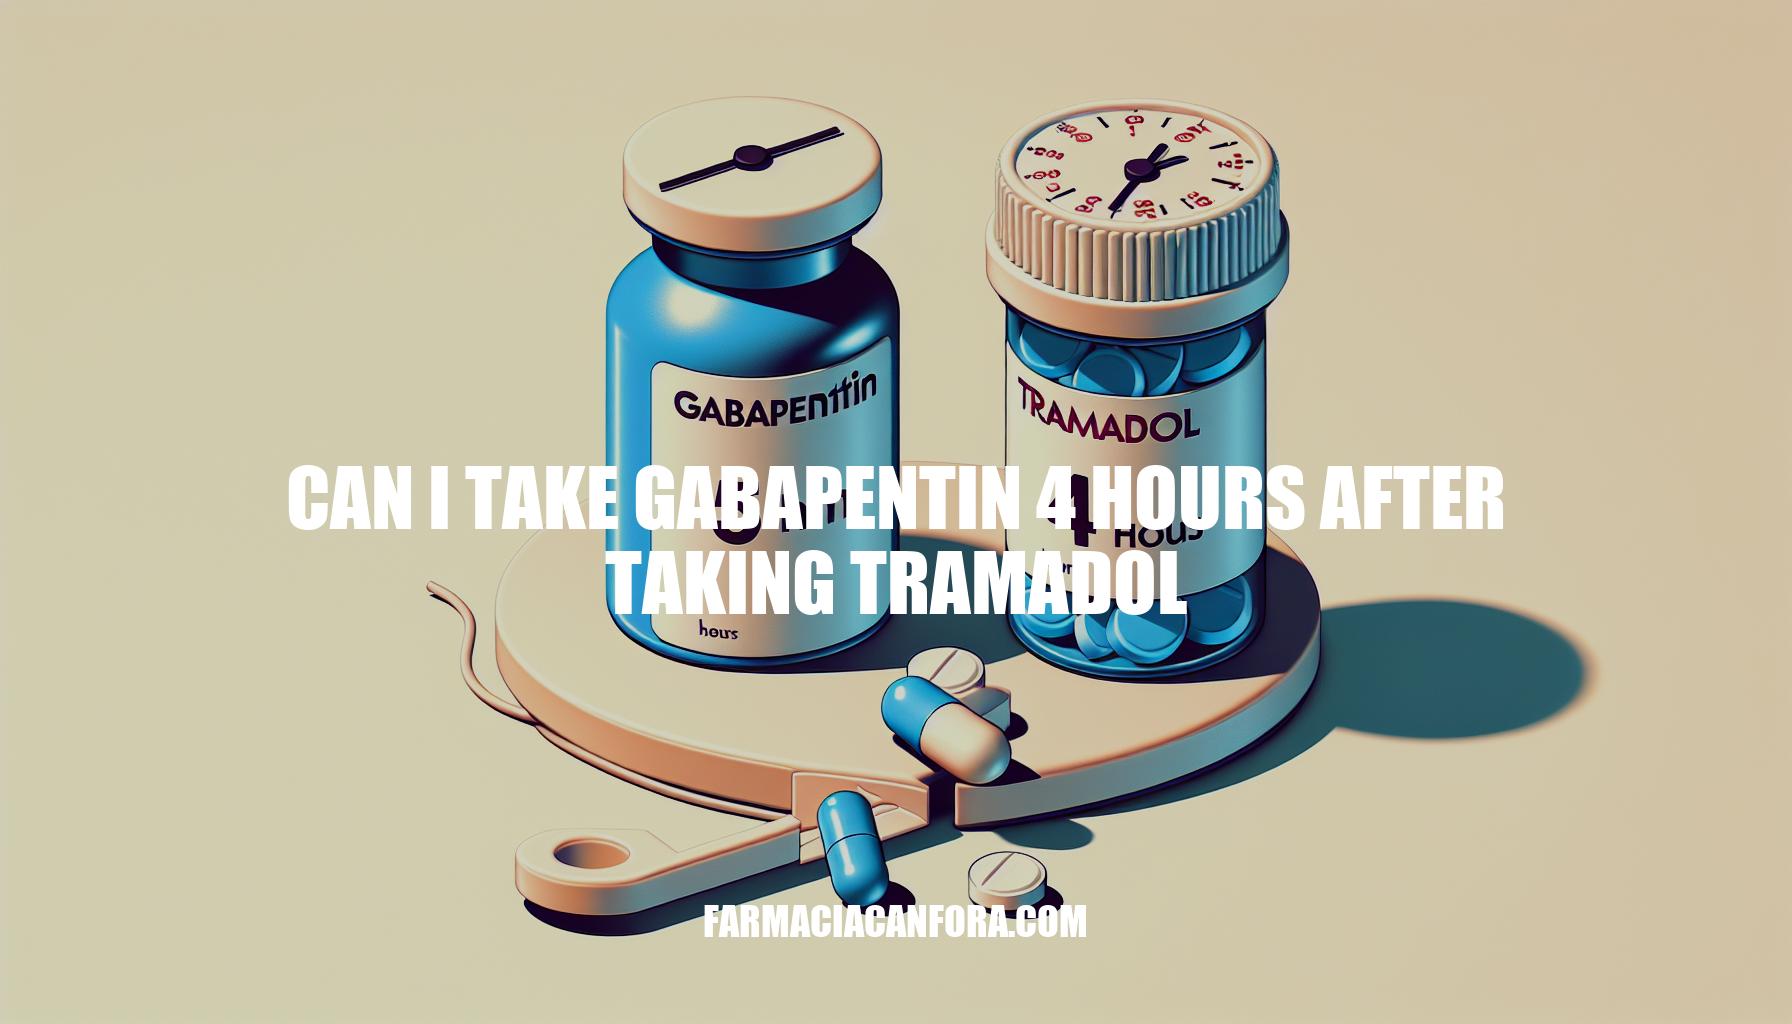 Can I Take Gabapentin 4 Hours After Taking Tramadol